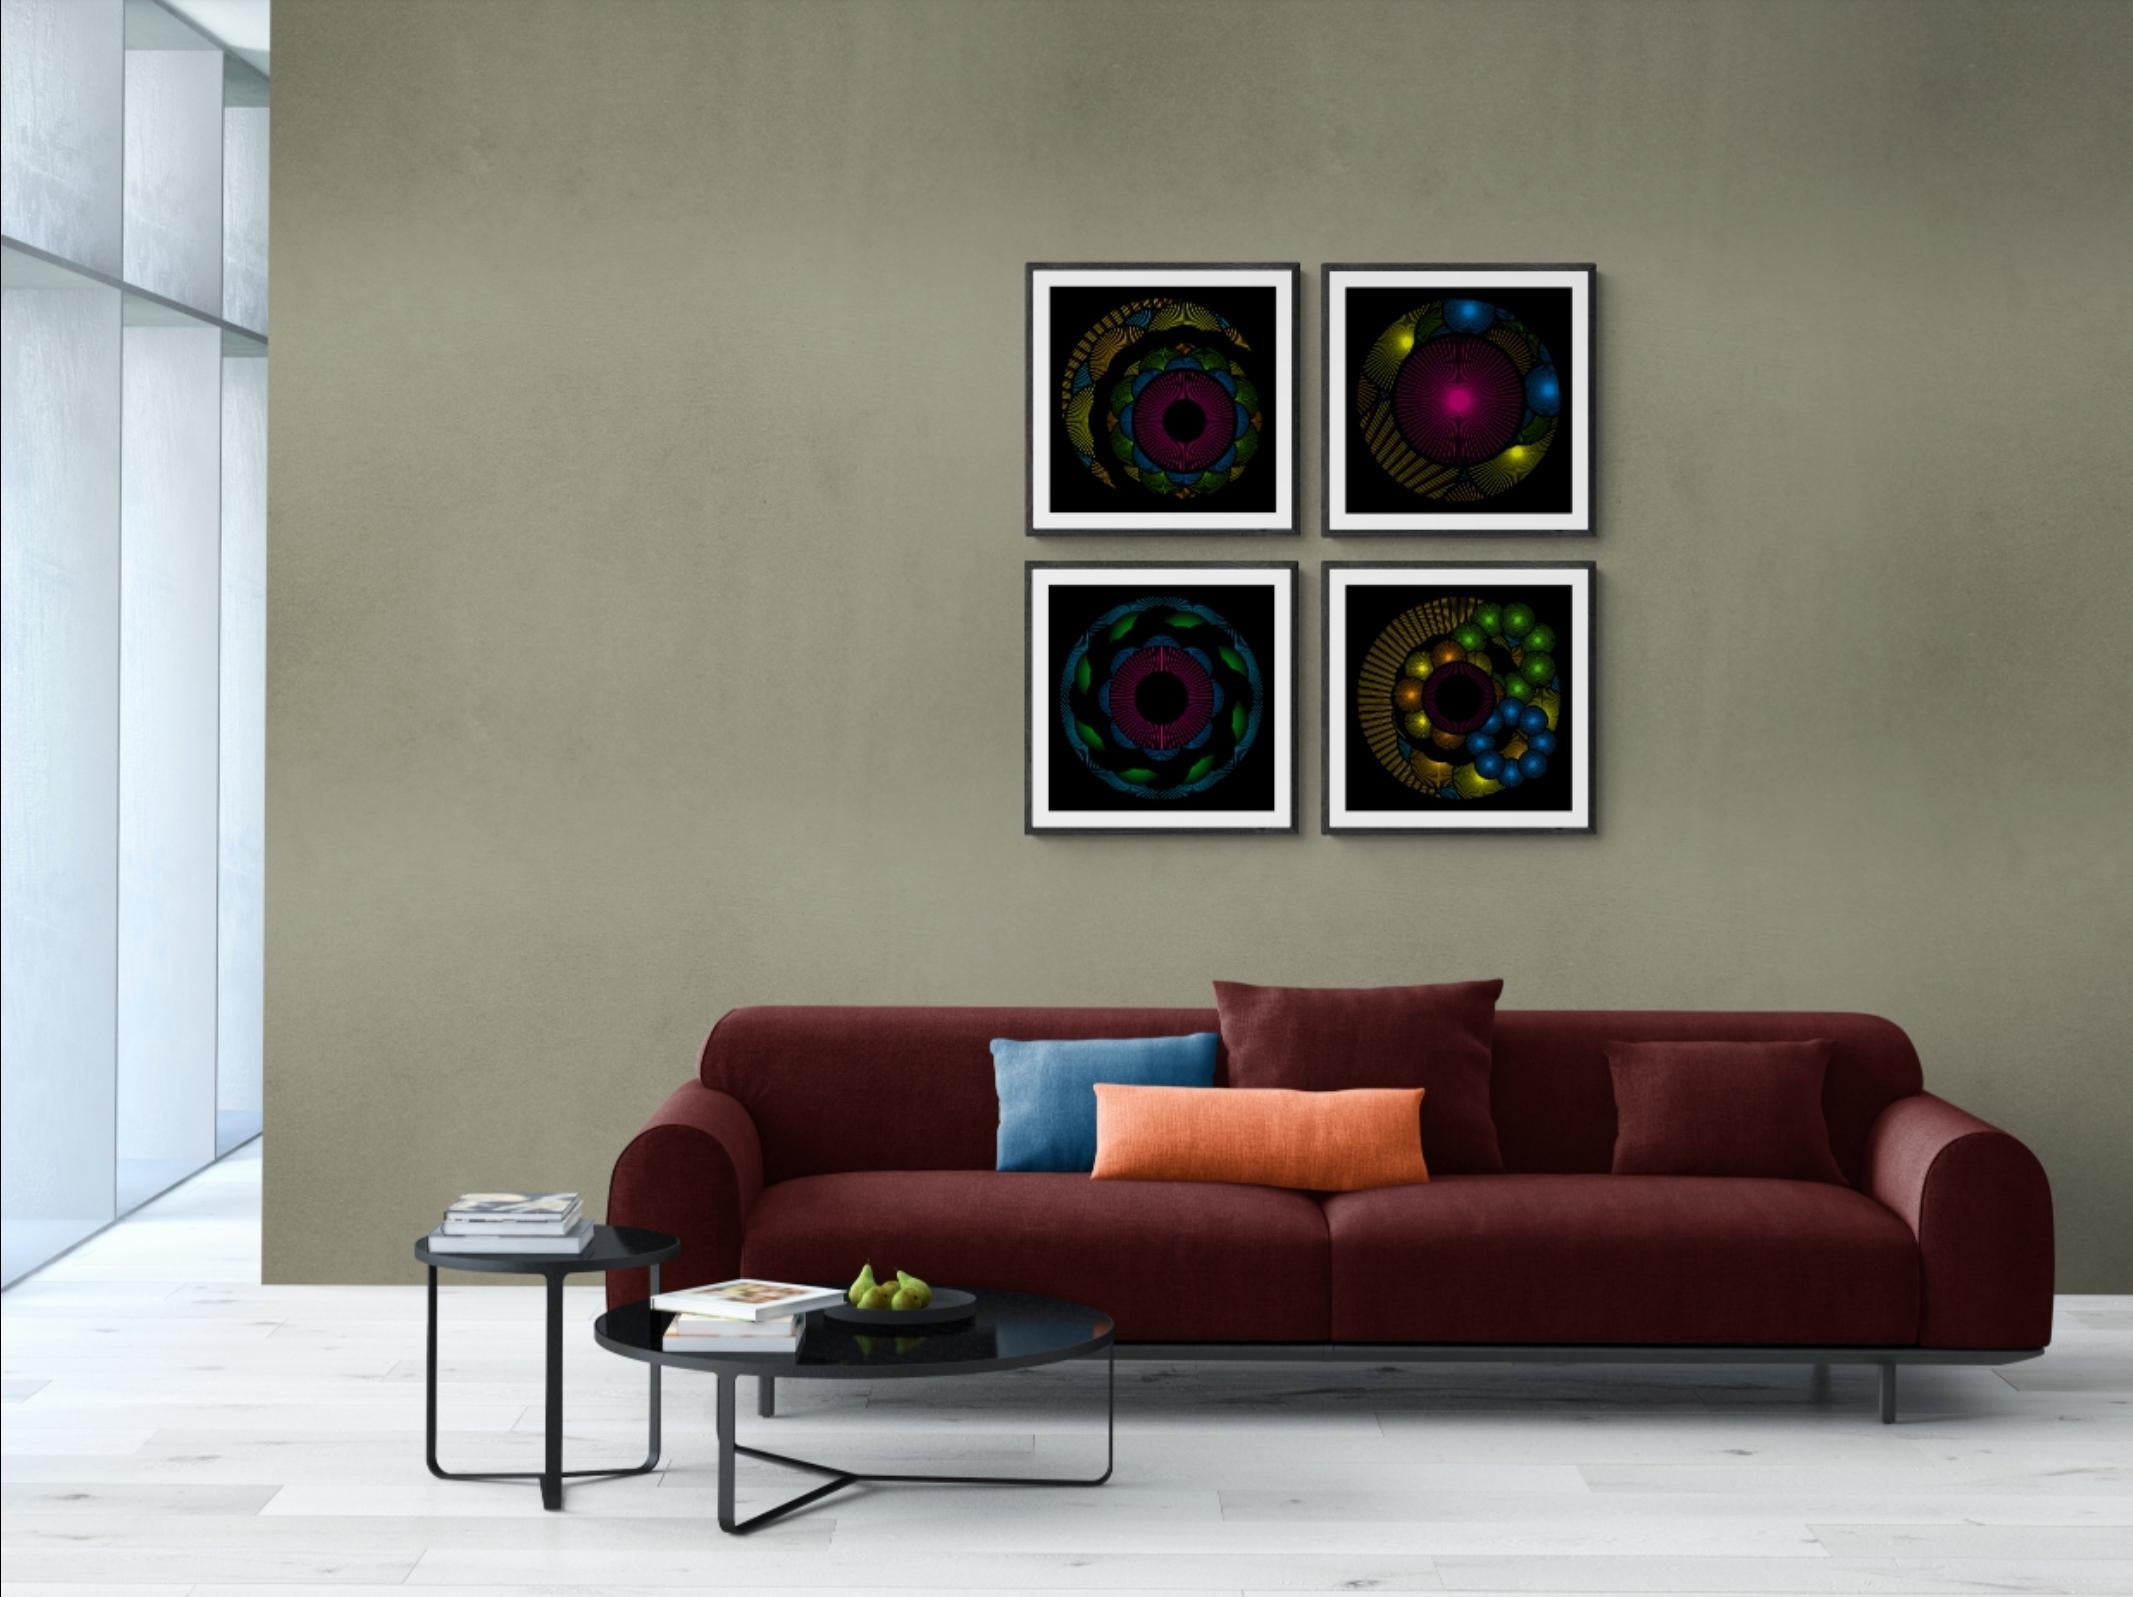 Nebulosa 33 - Abstract Geometric Print by Julio Campos